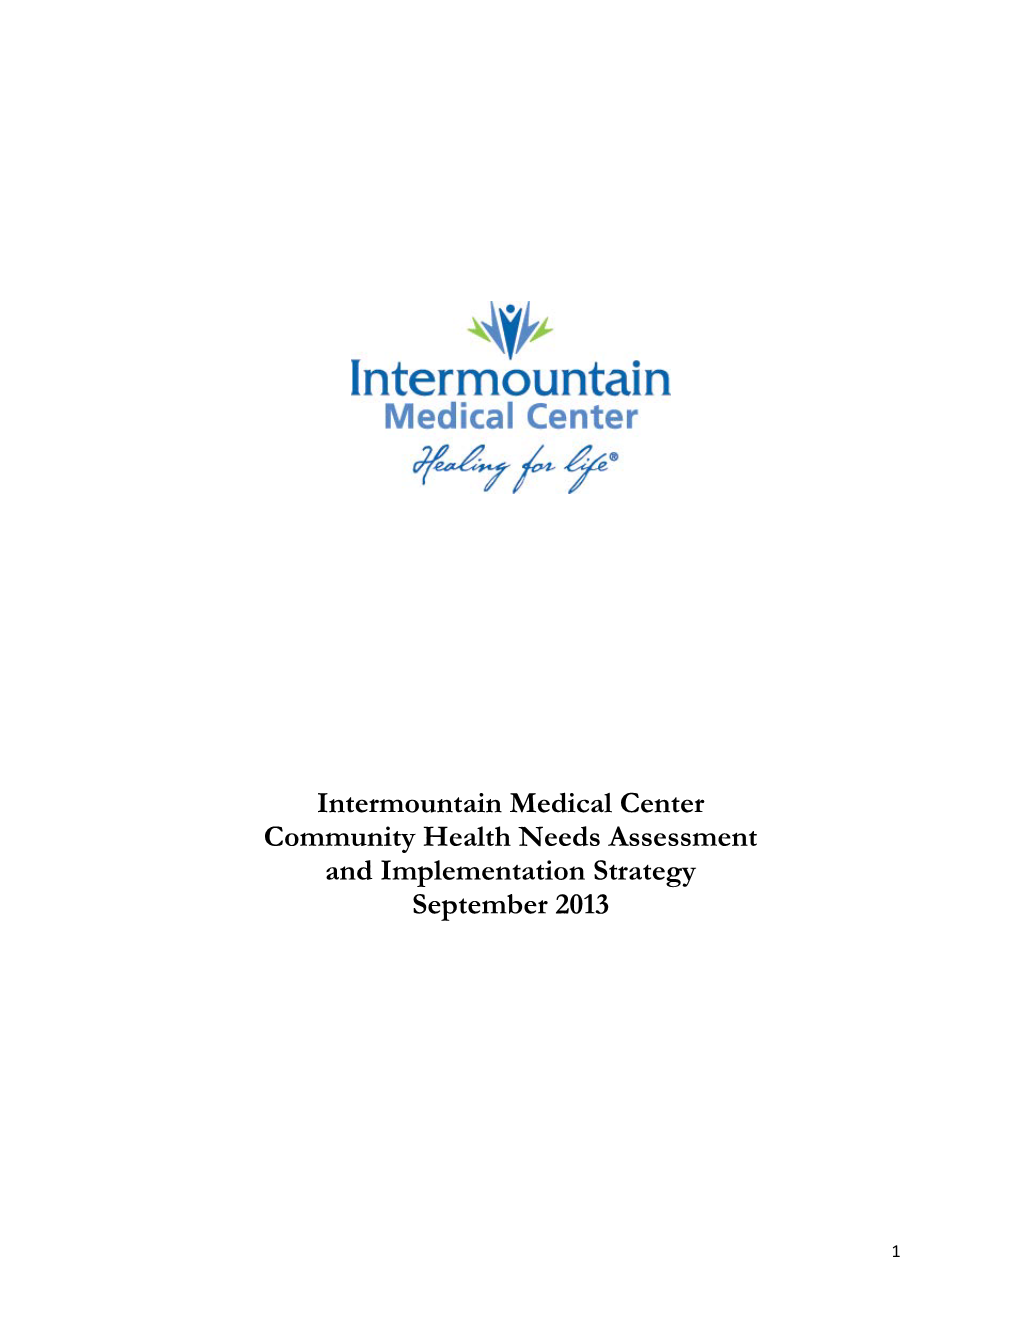 Intermountain Medical Center Community Health Needs Assessment and Implementation Strategy September 2013